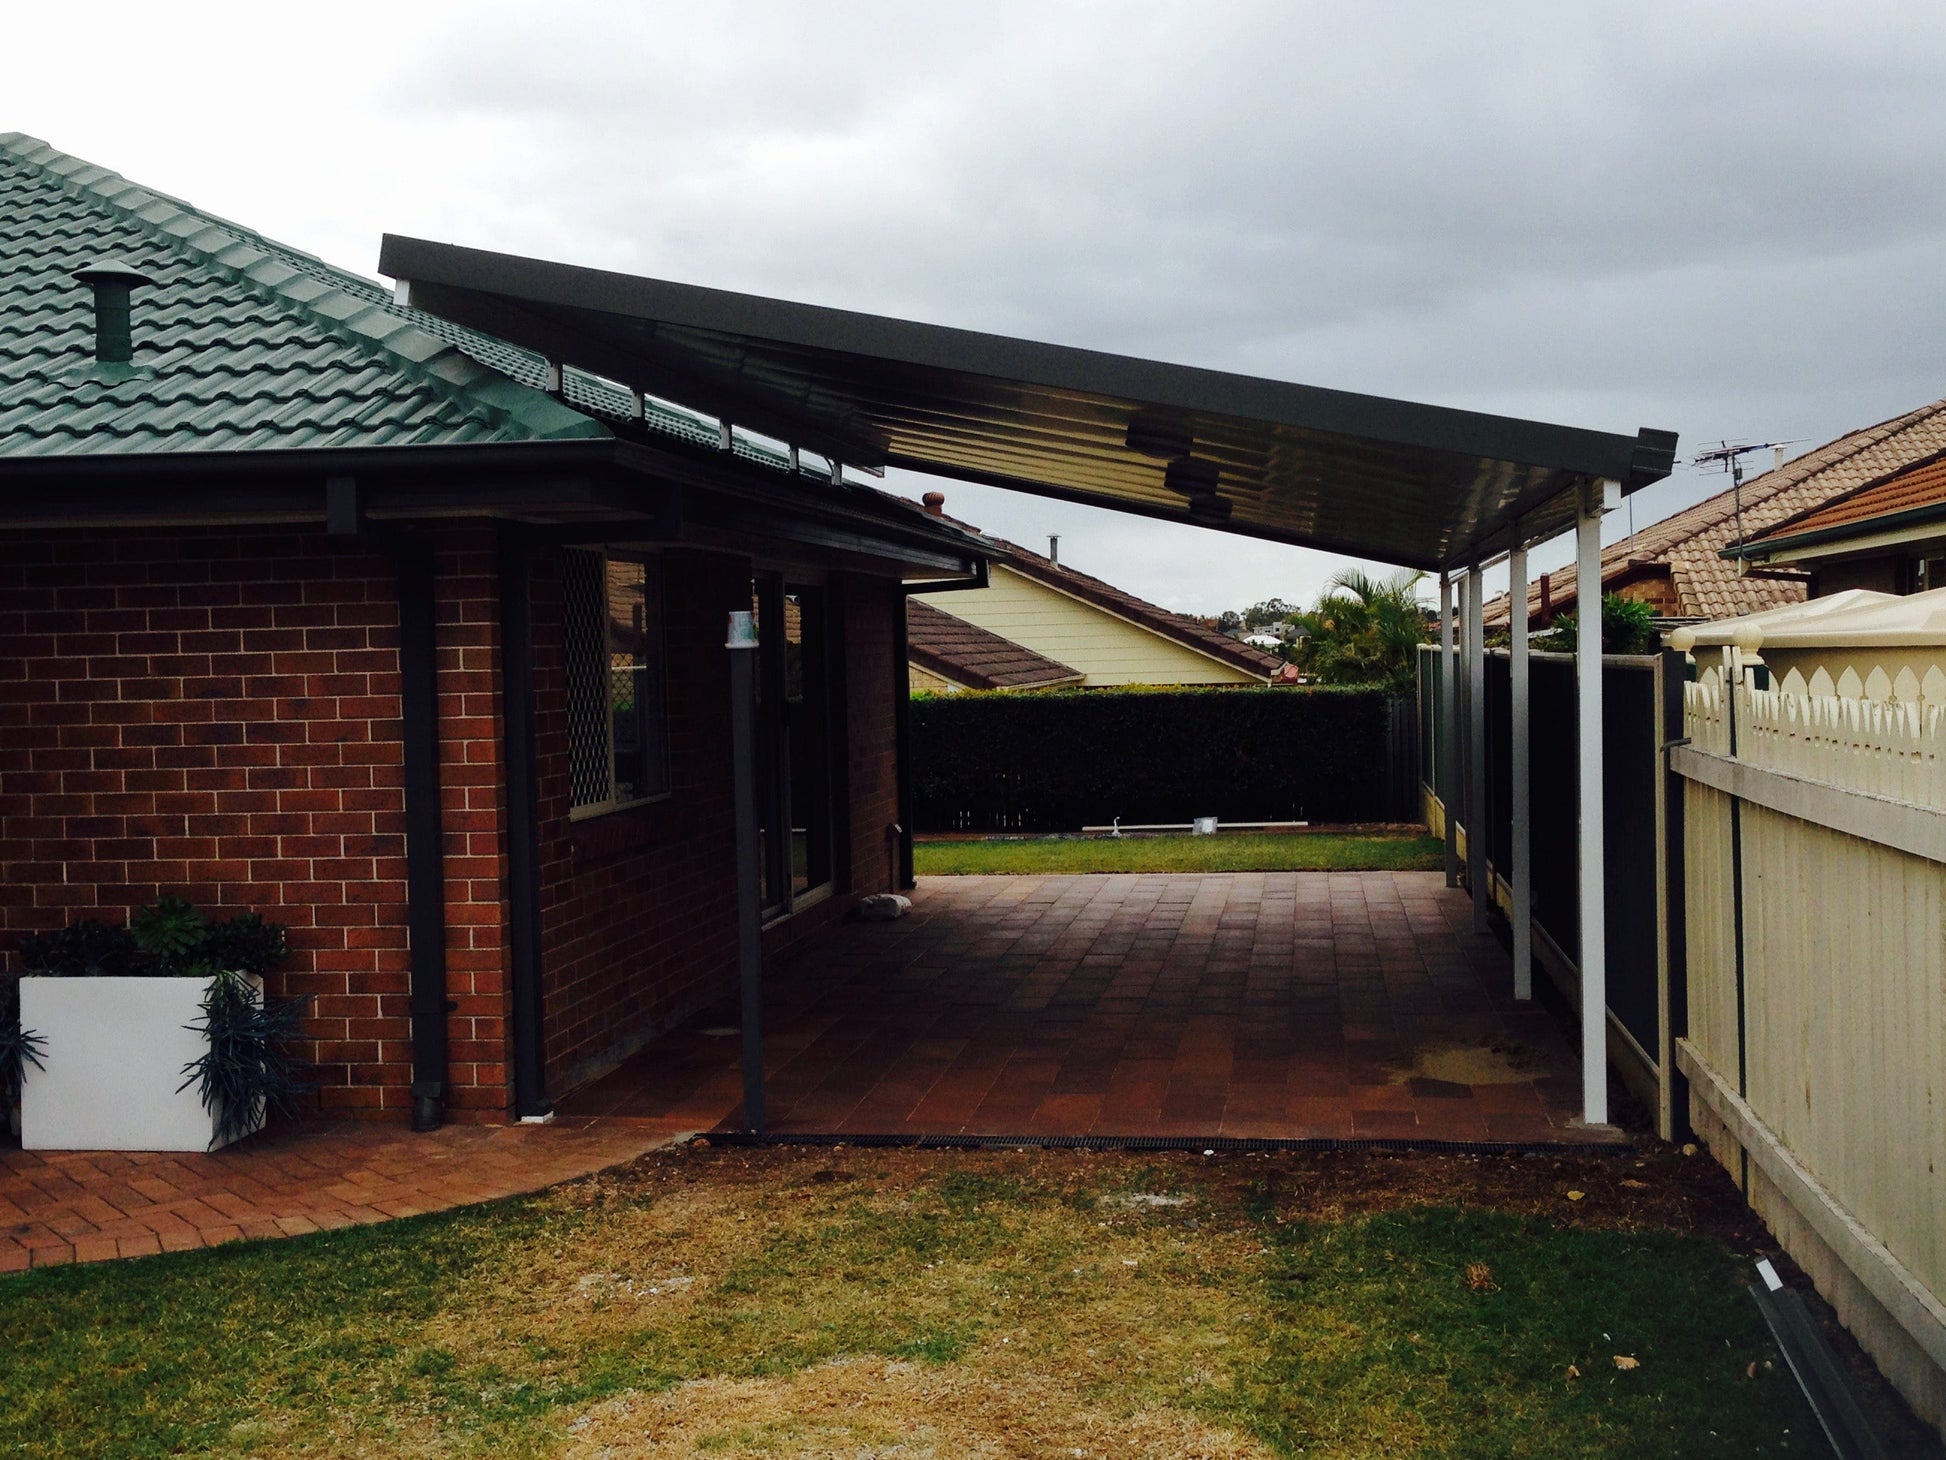 Insulated Flyover Patio Roof- 15m x 9m- Supply & Install QHI National